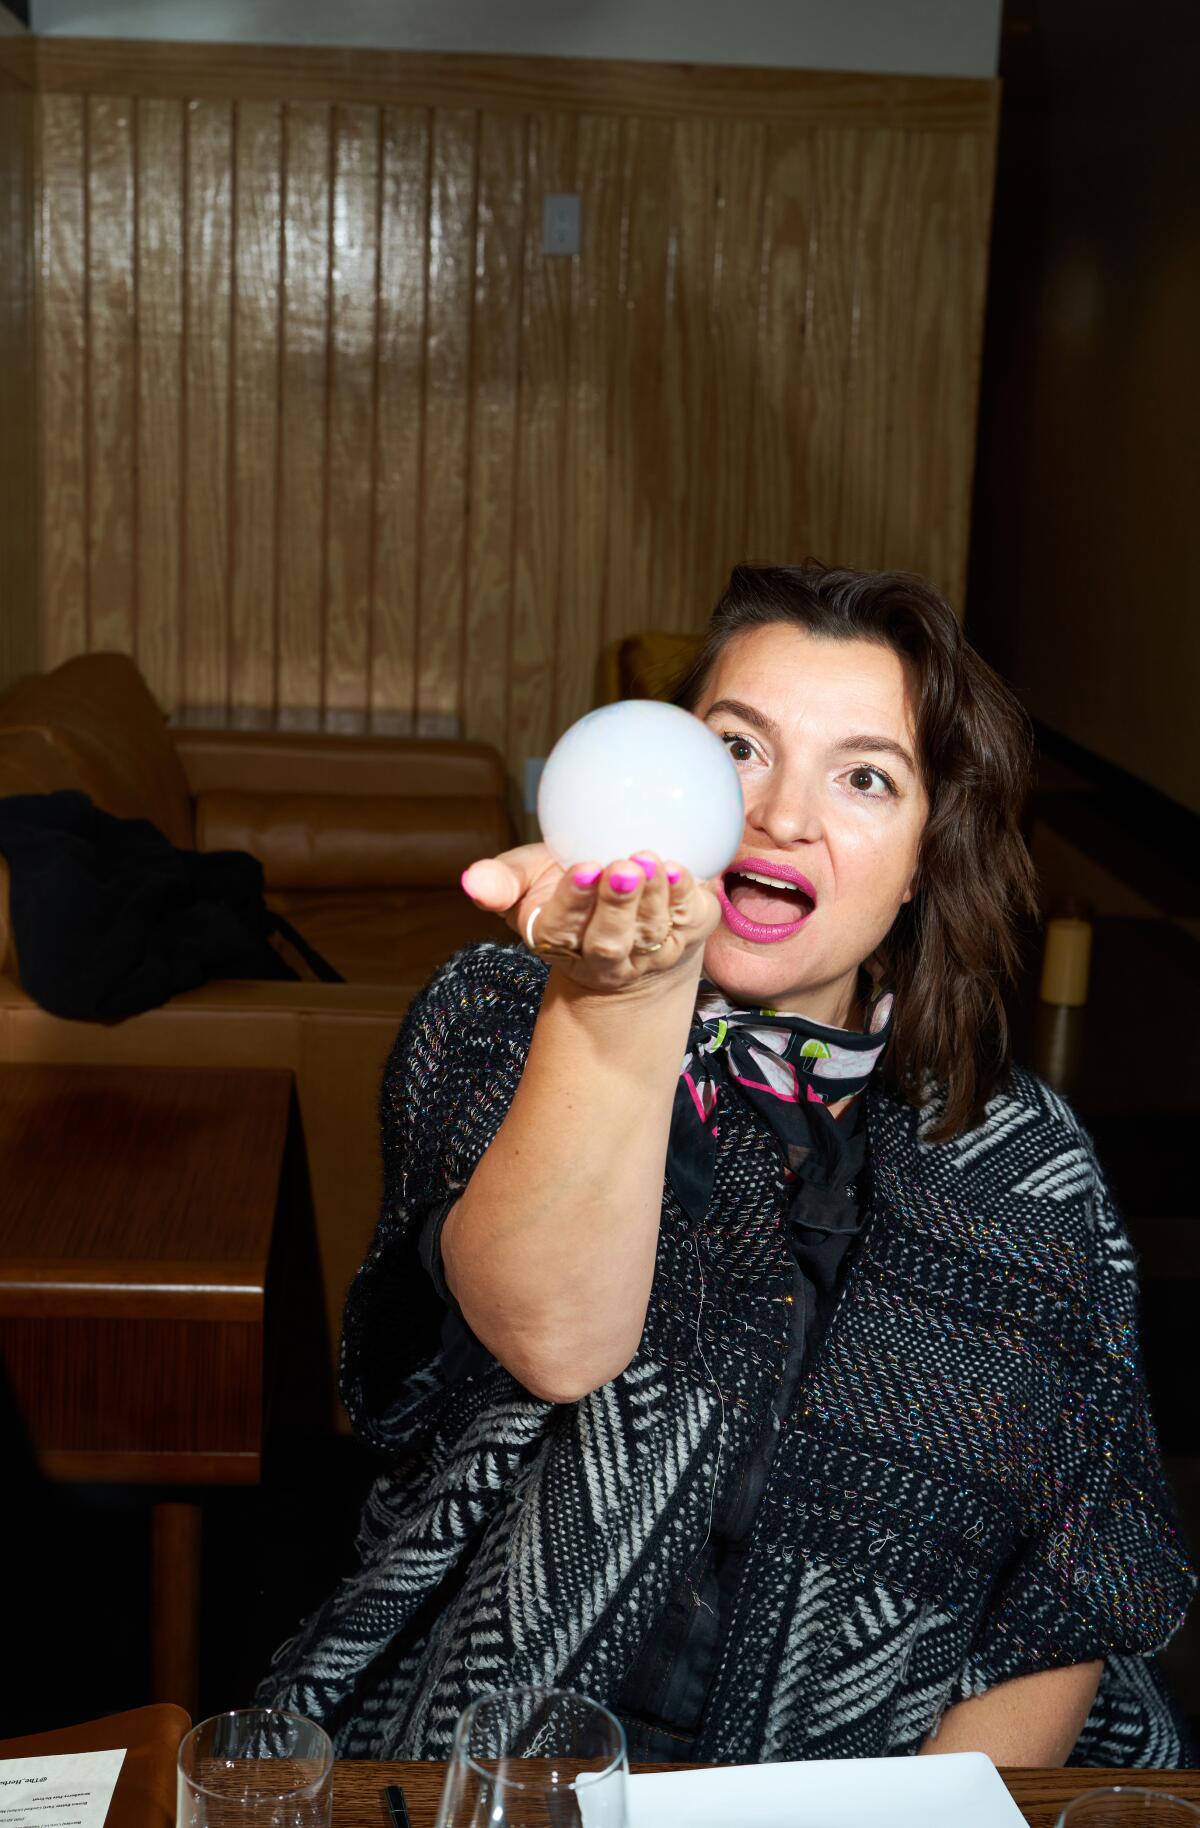 A diner holds a smoke-filled bubble in her hand.